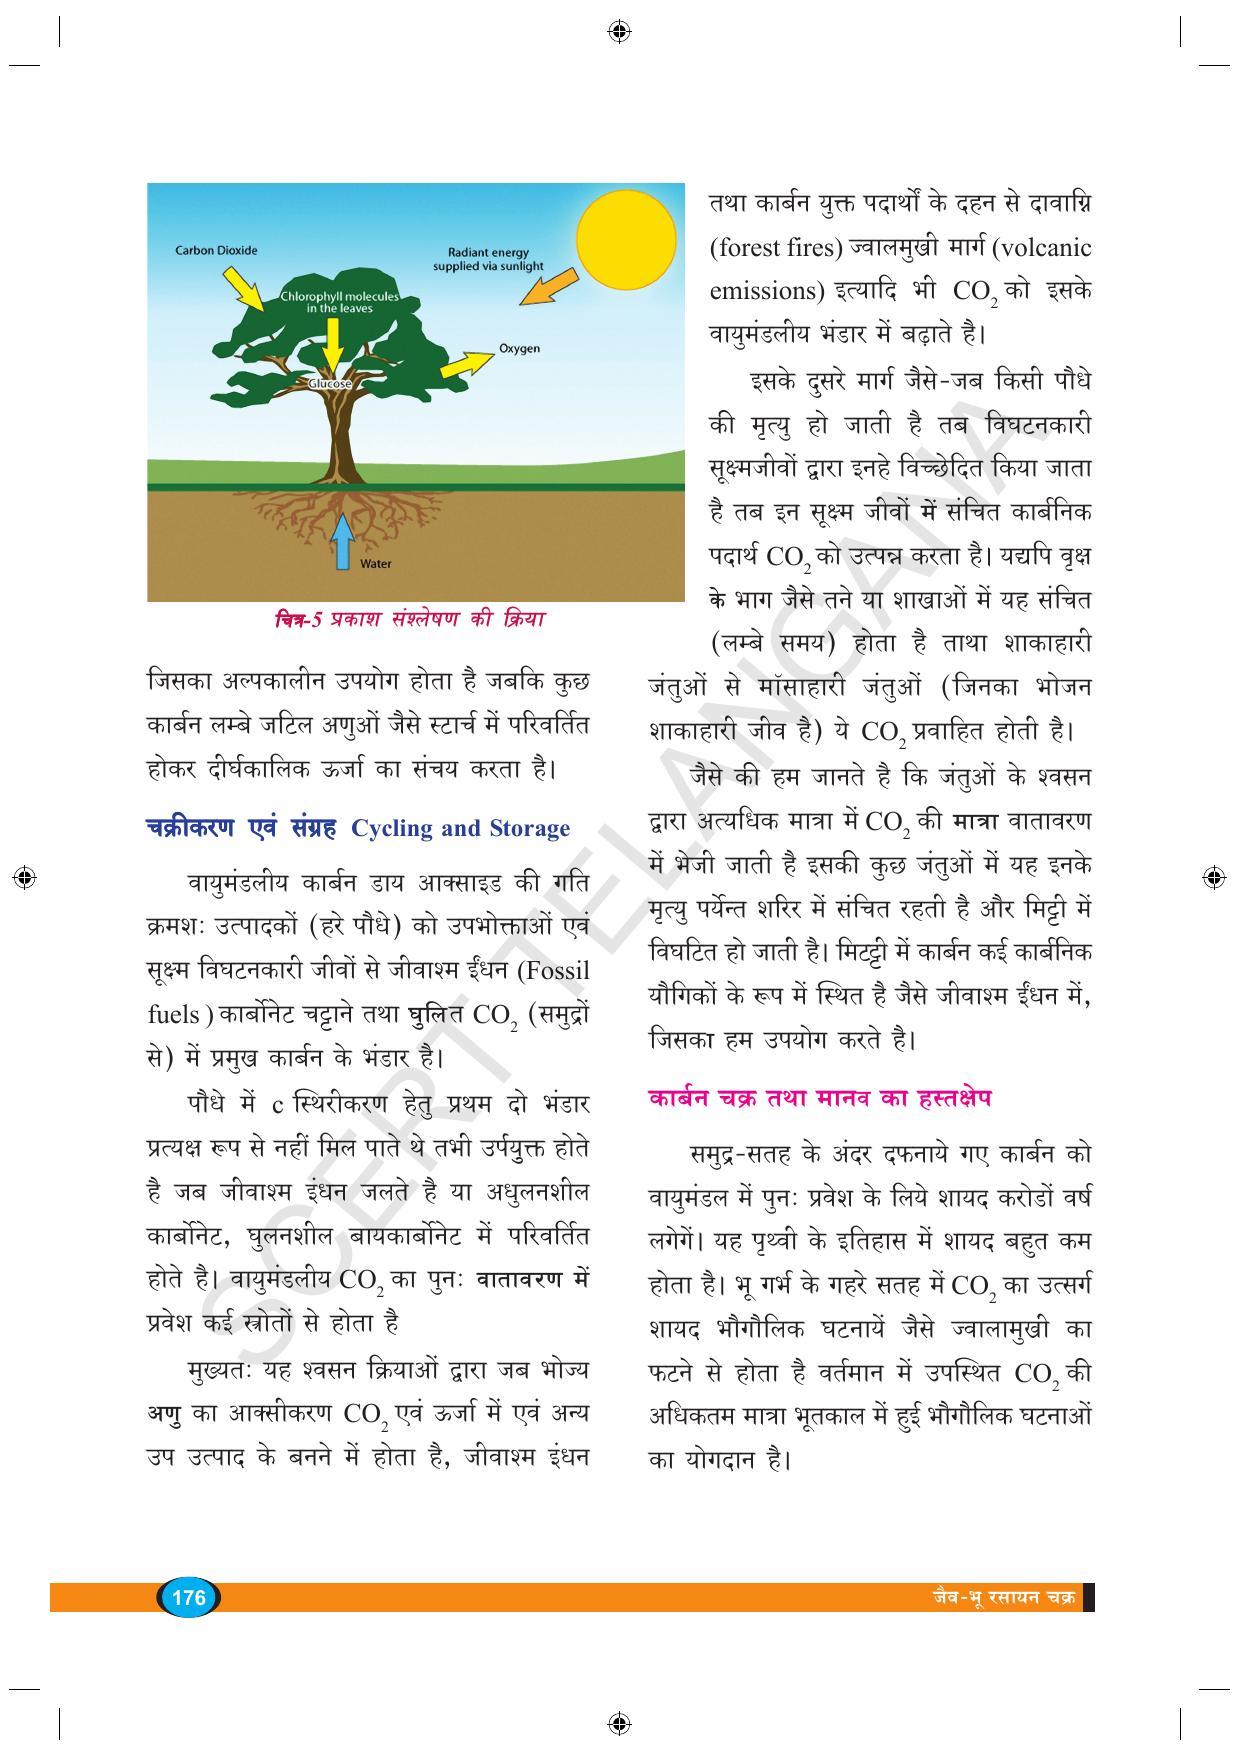 TS SCERT Class 9 Biological Science (Hindi Medium) Text Book - Page 188